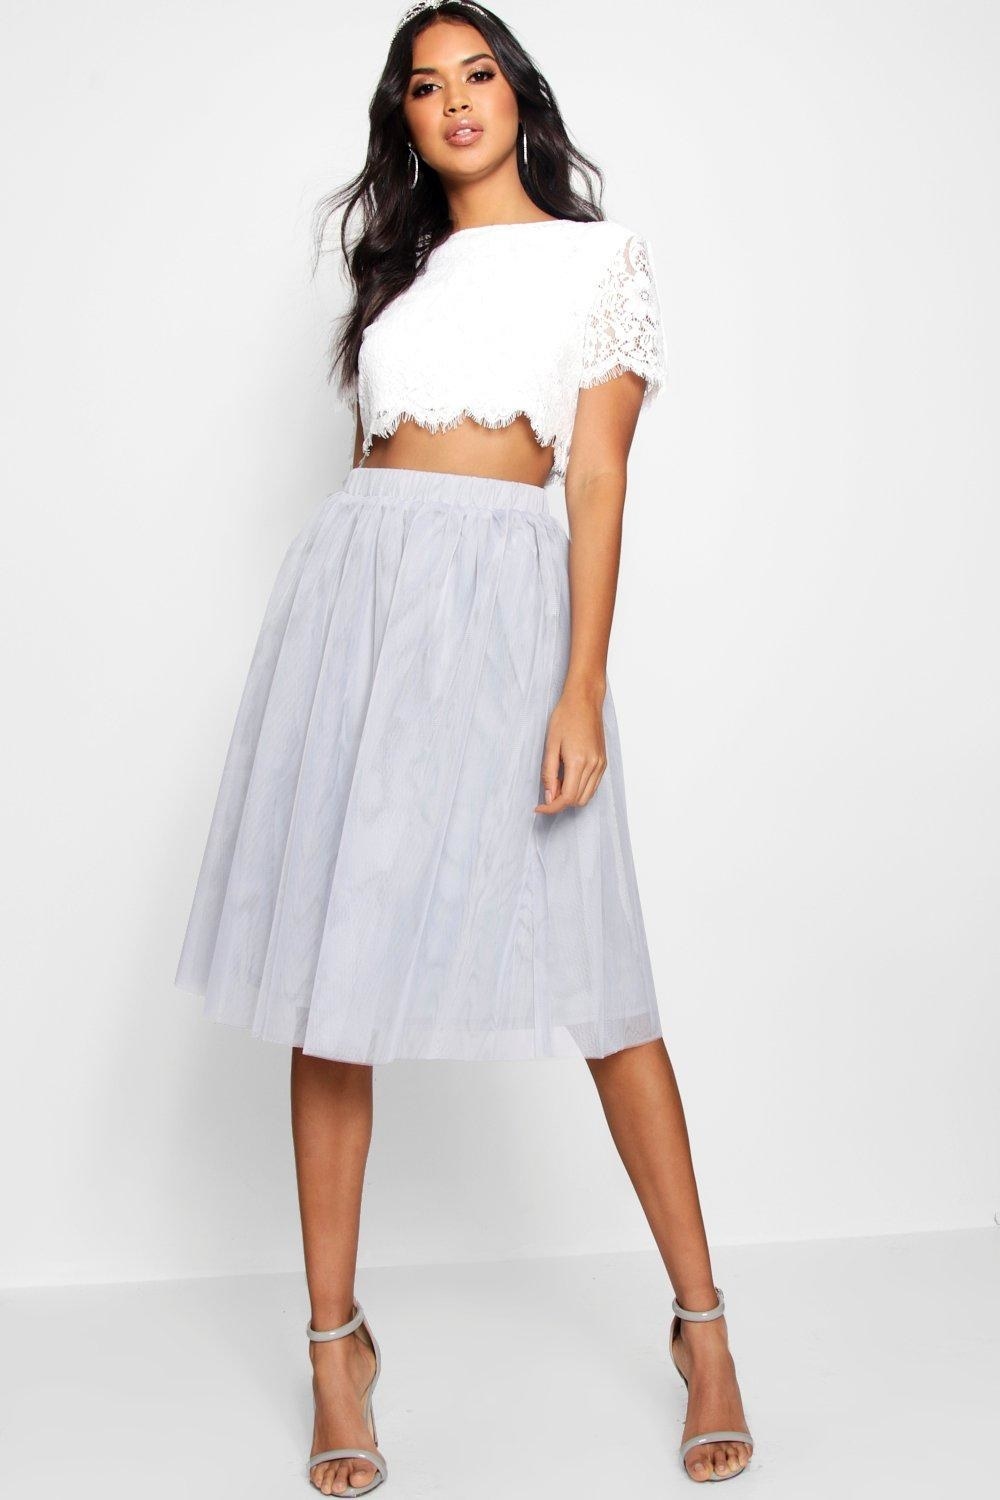 white skirt outfit quiz buzzfeed